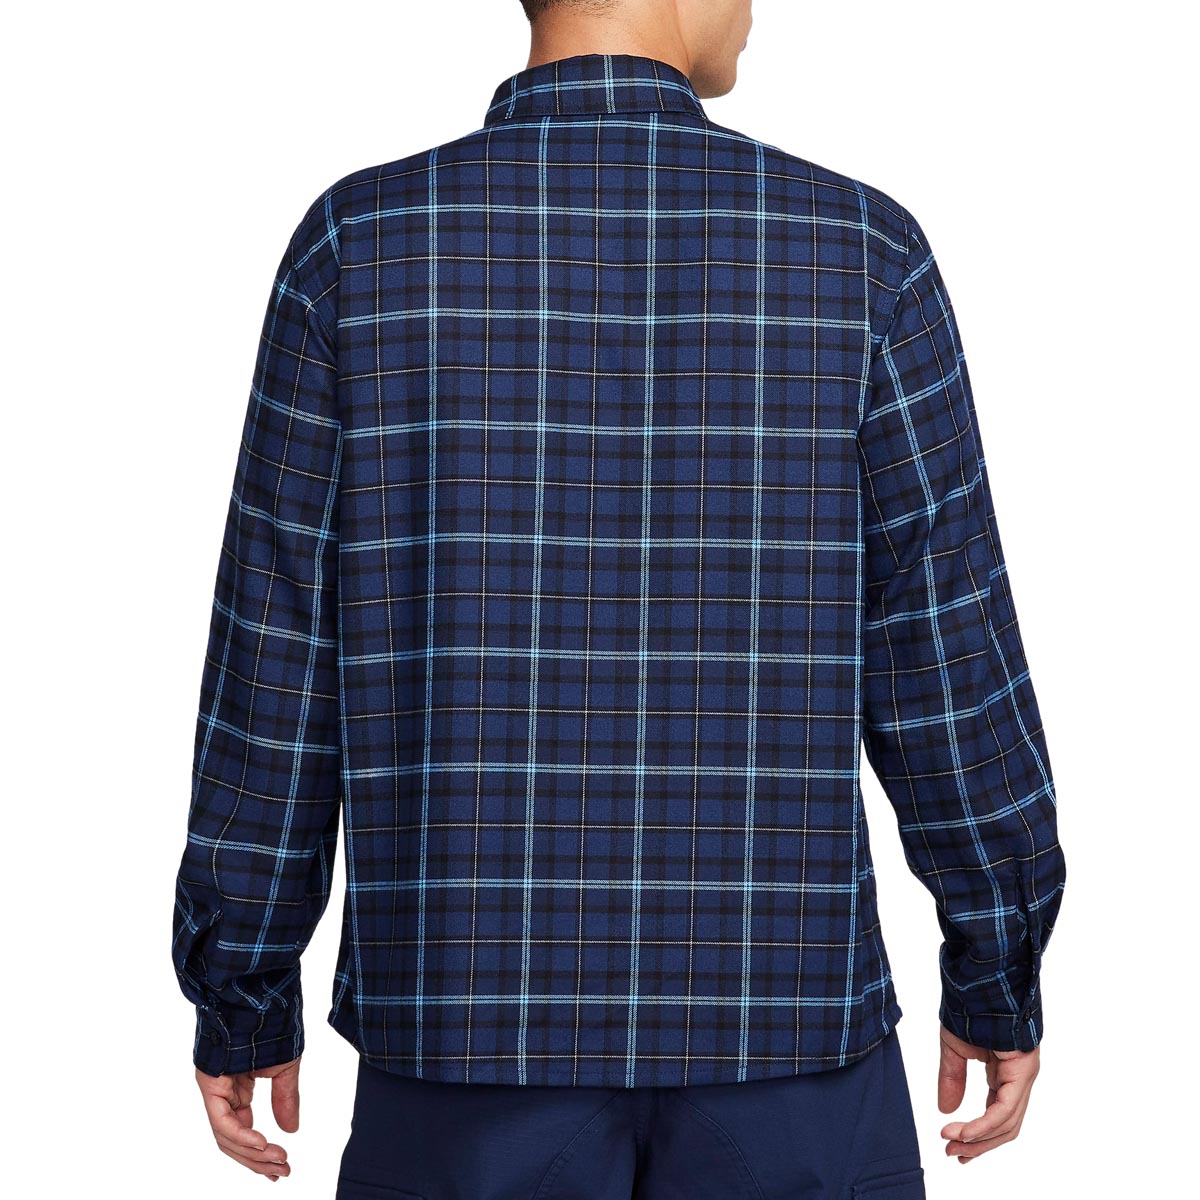 Nike SB Flannel Skate Button Up Shirt - Midnight Navy/Obsidian image 2